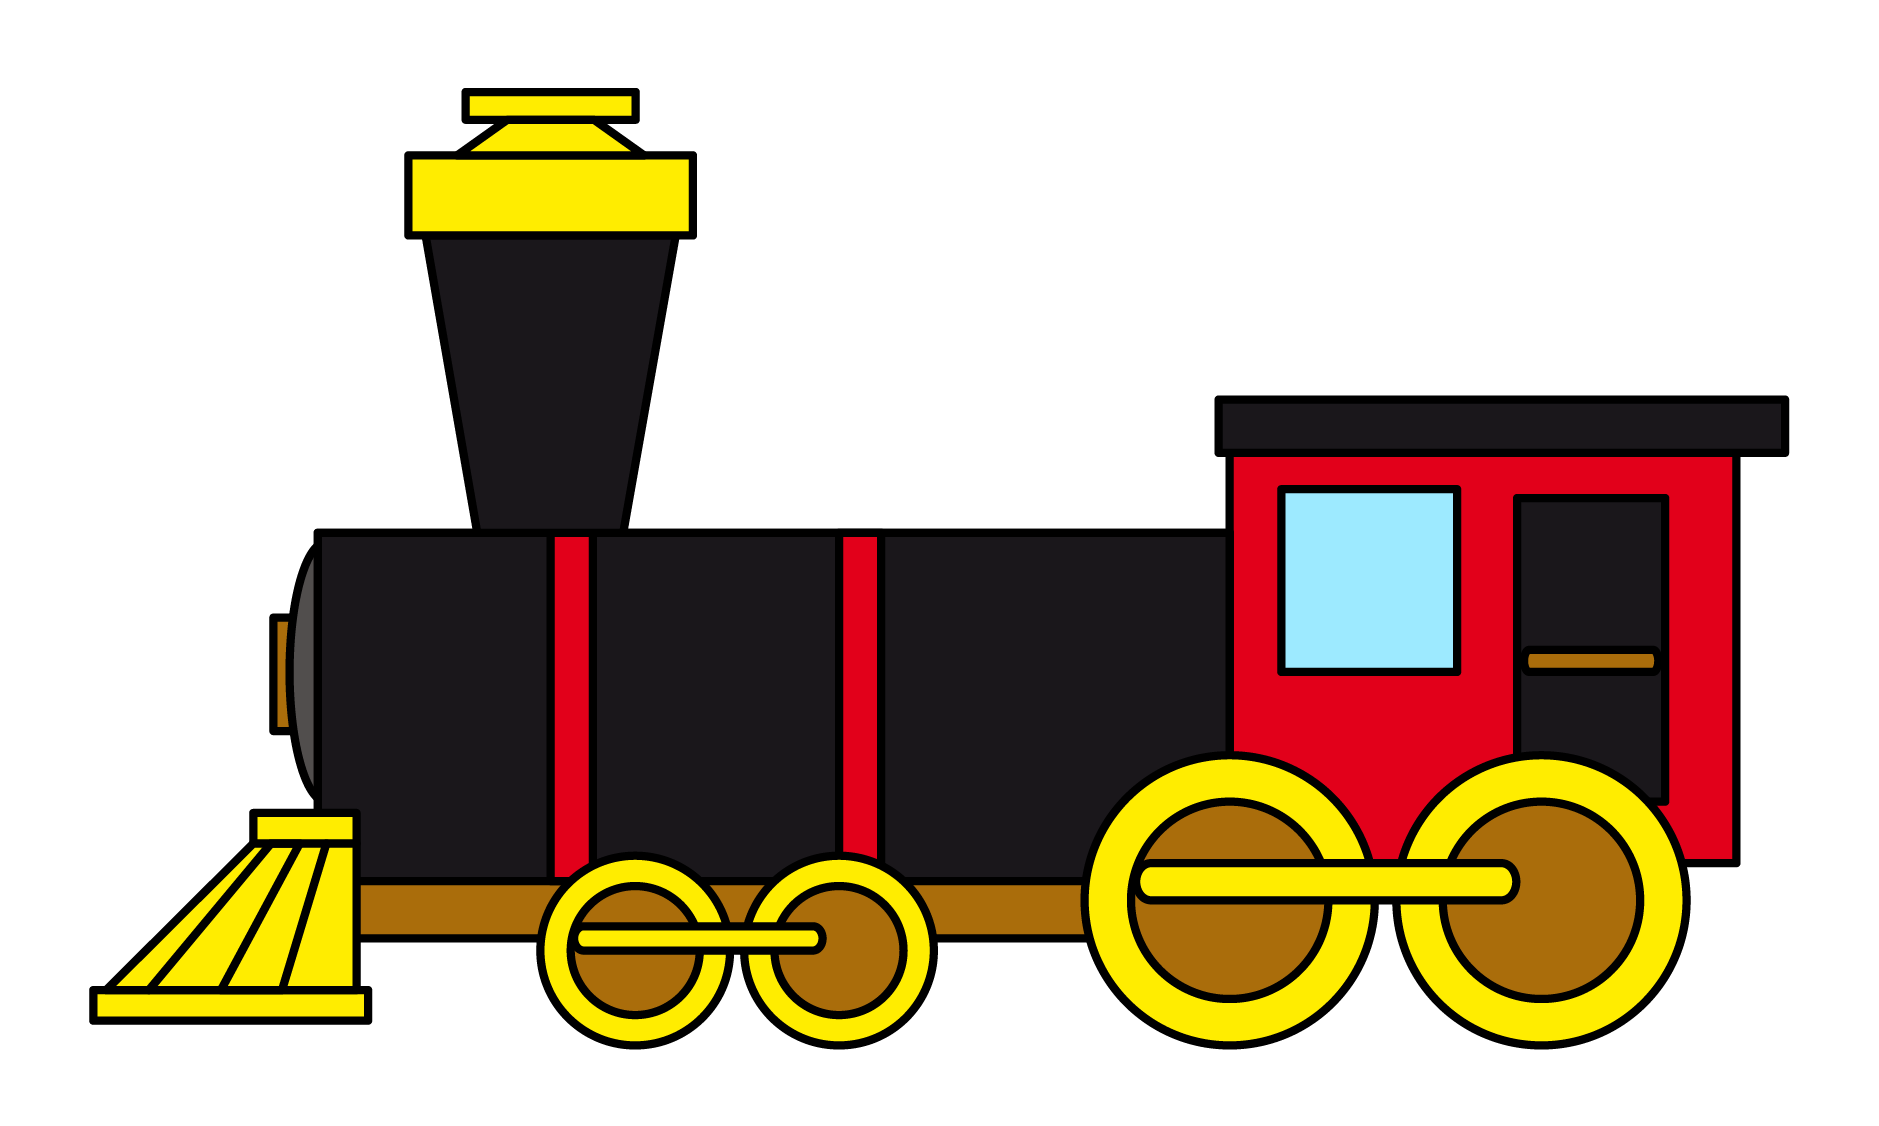 Cartoon Images Of Trains - ClipArt Best